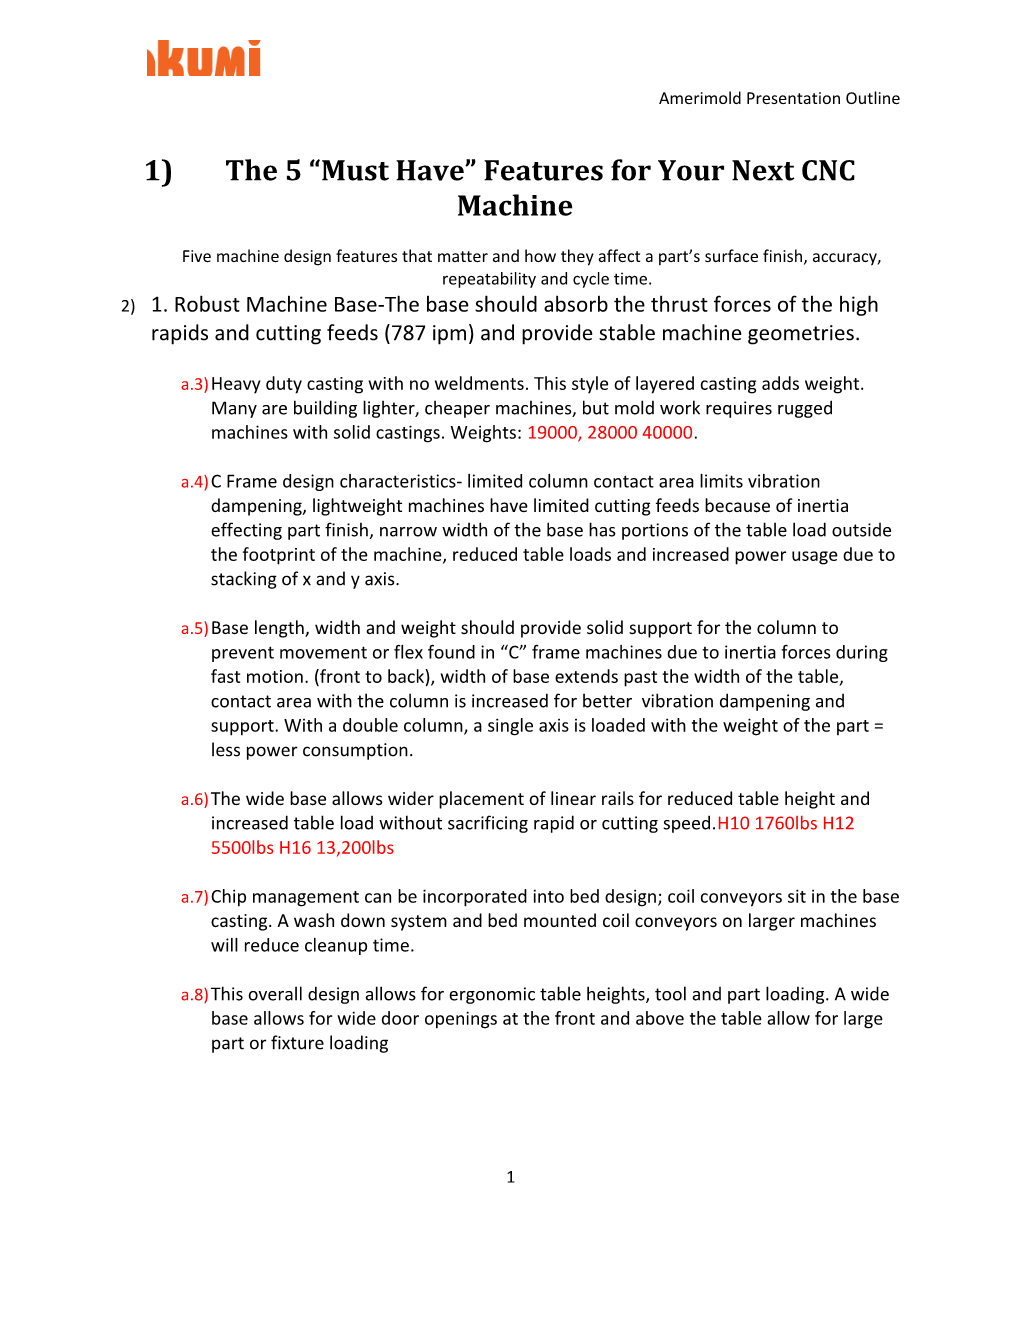 1)The 5 Must Have Features for Your Next CNC Machine